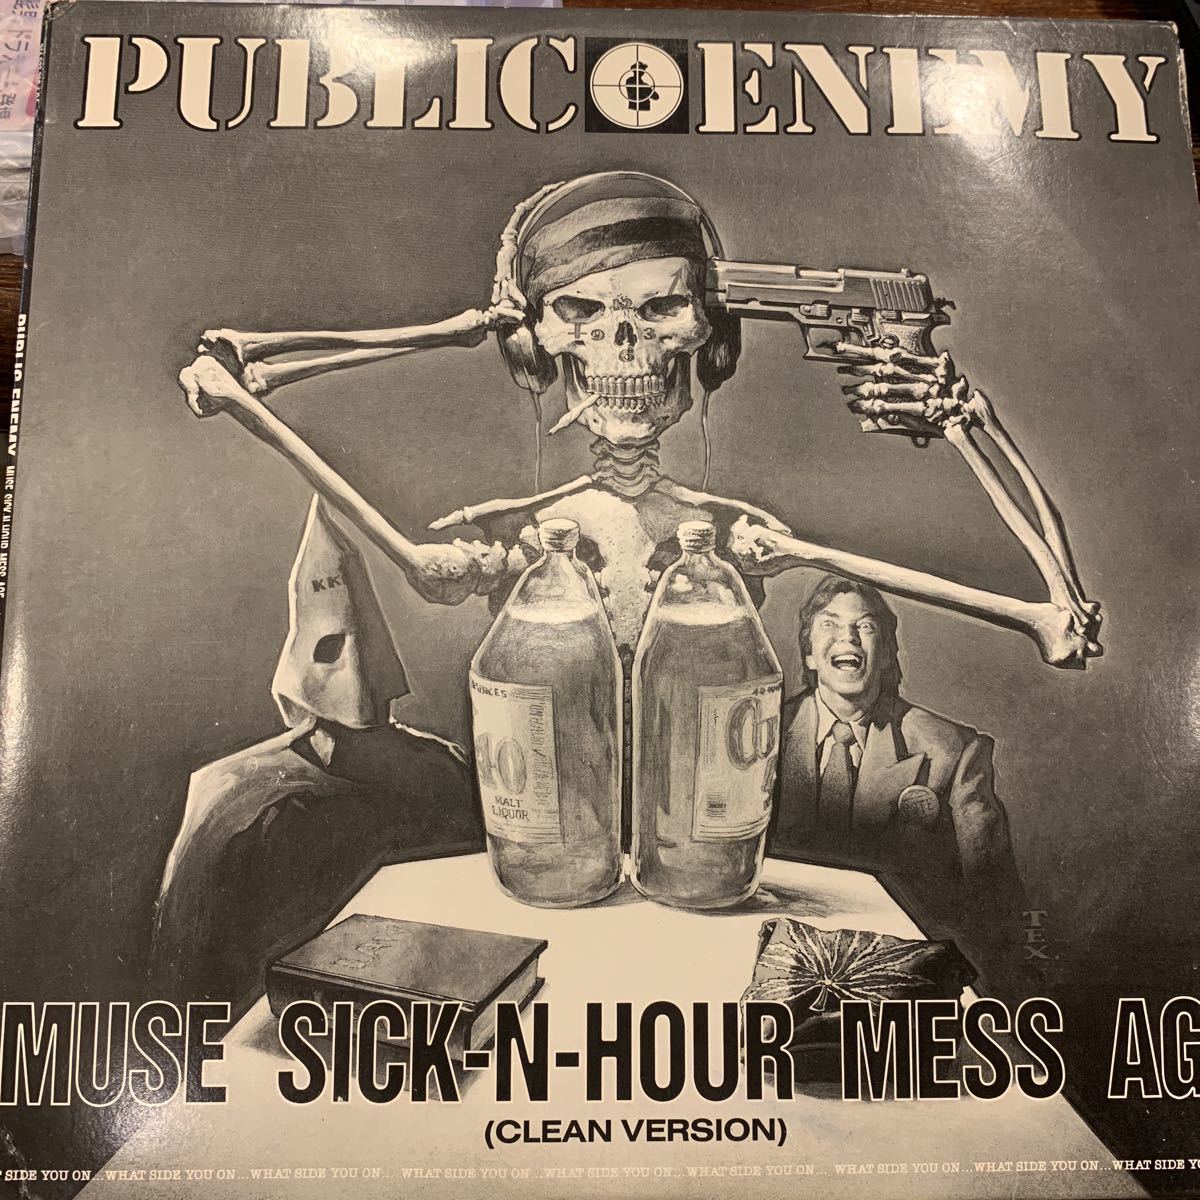 Public Enemy /Muse Sick-N-Hour Mess Age 中古レコード4枚組_画像1